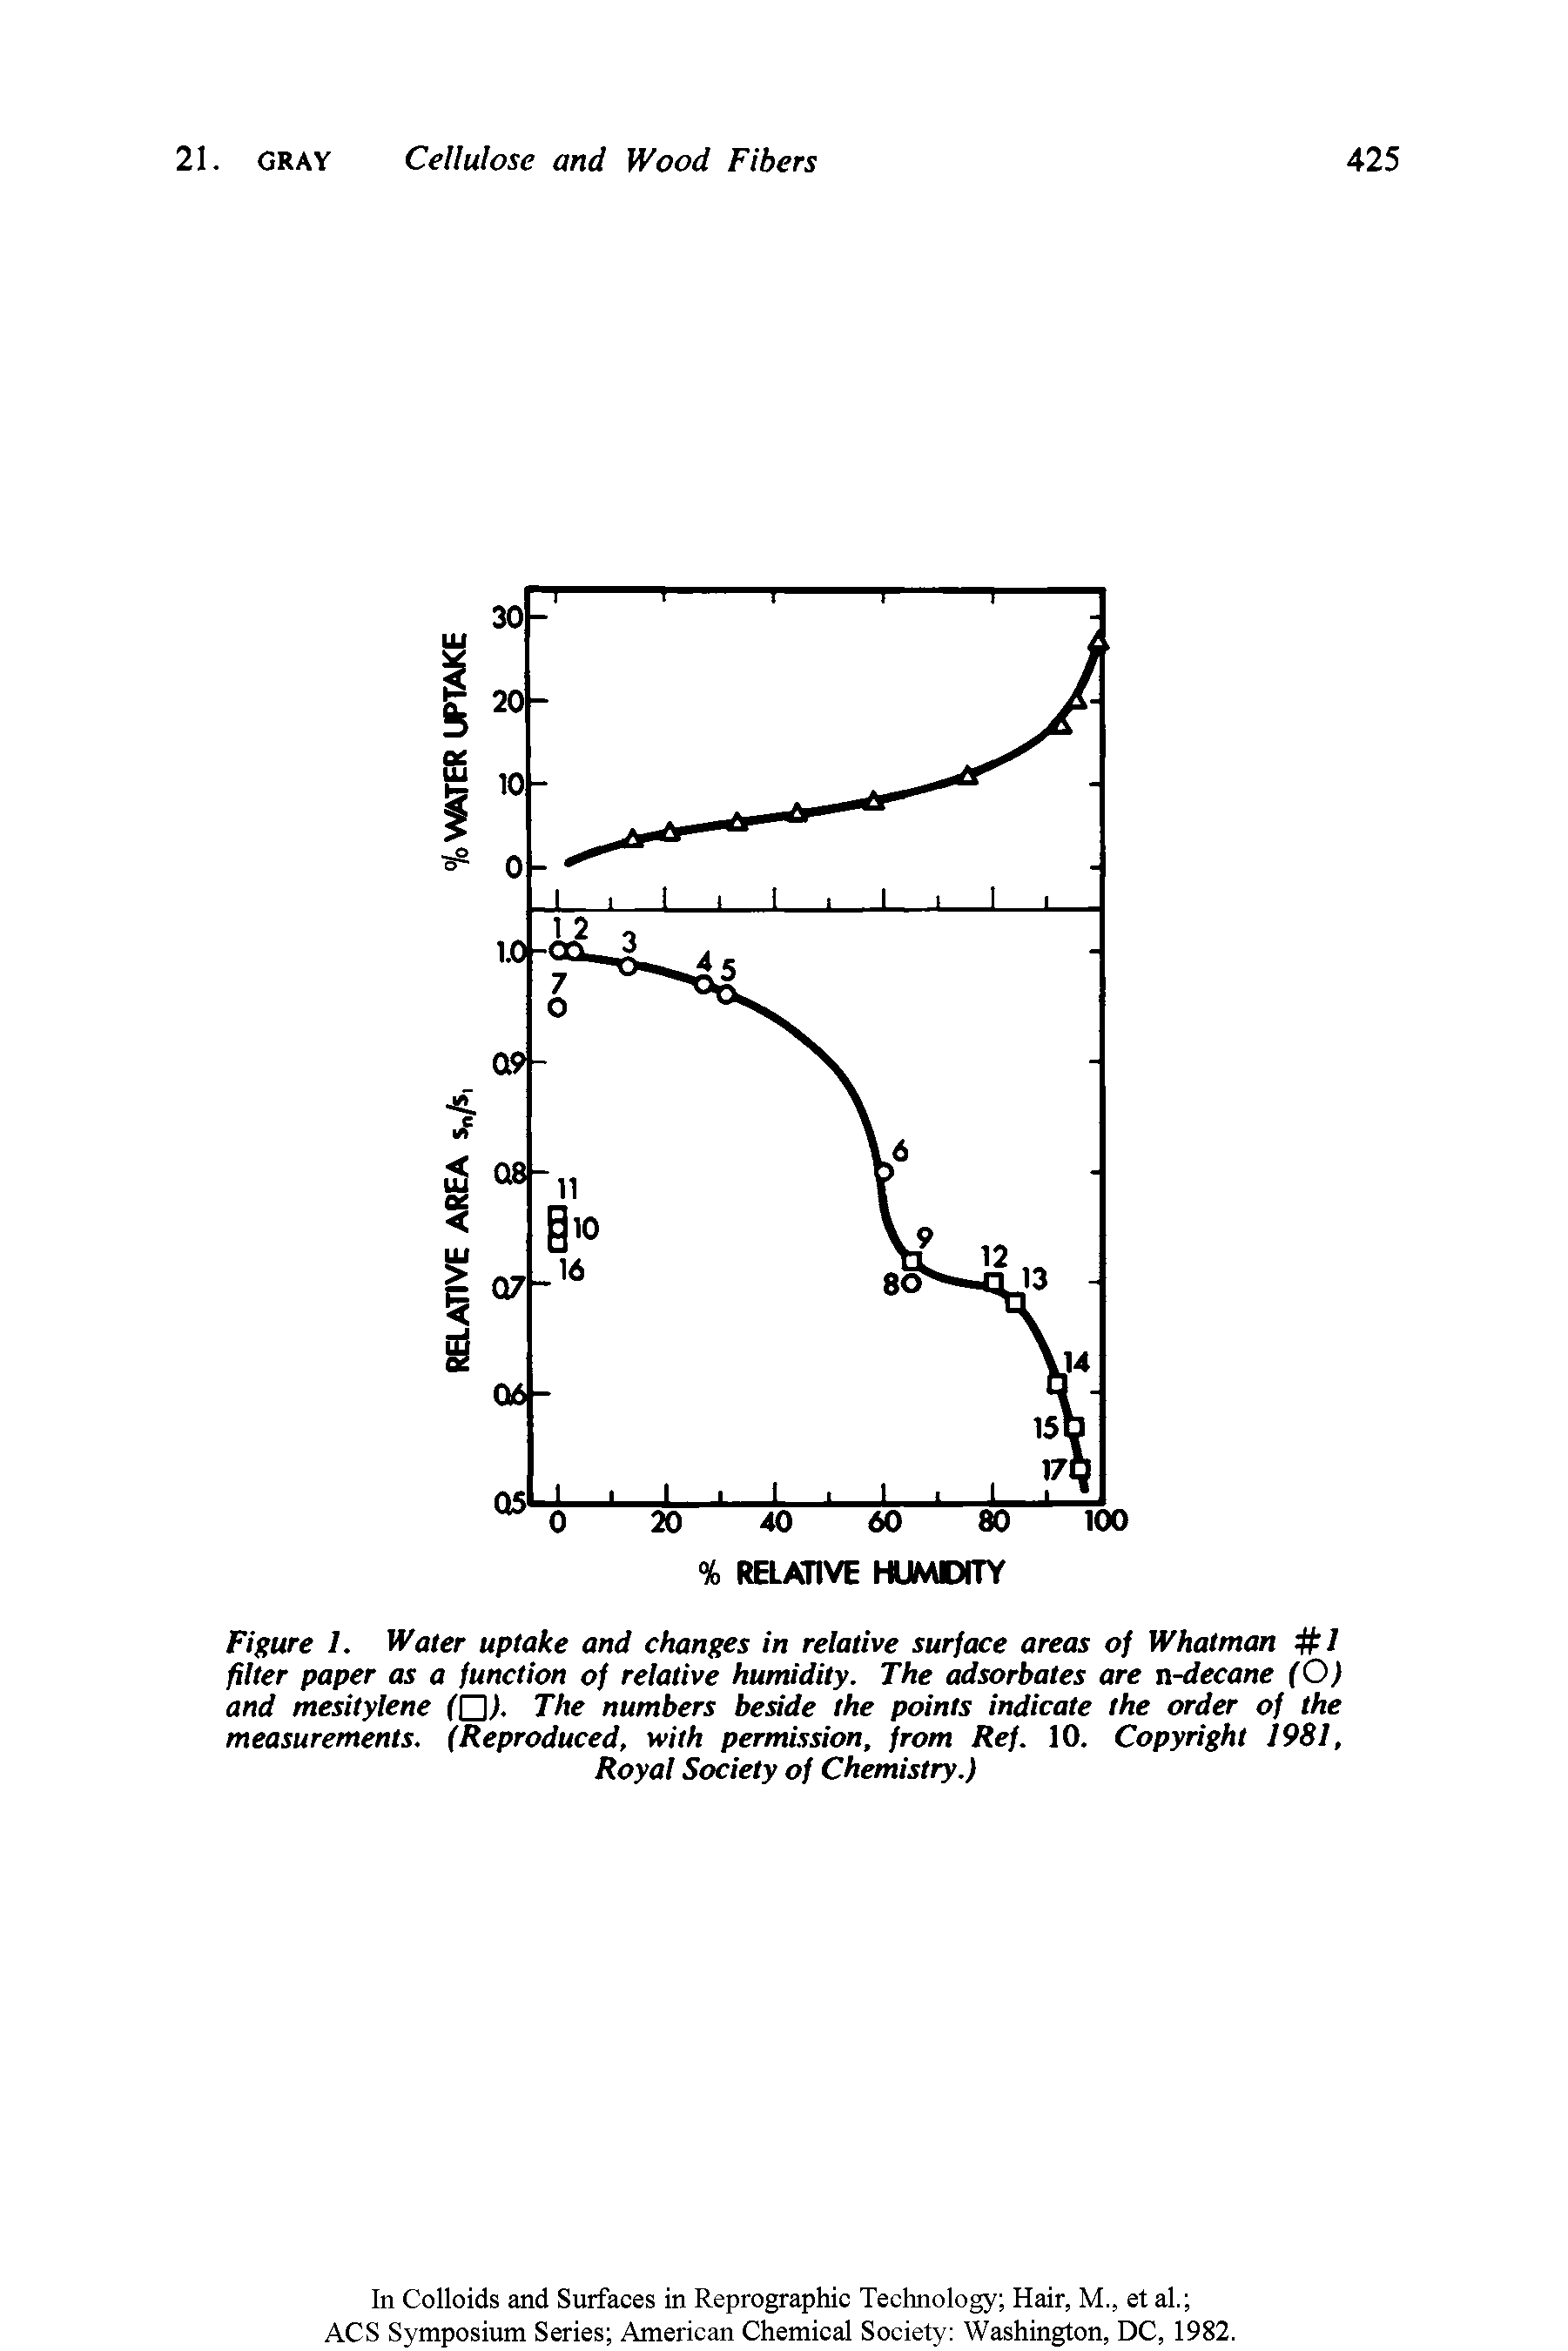 Figure 1. Water uptake and changes in relative surface areas of Whatman / filter paper as a function of relative humidity. The adsorbates are n-decane (O) and mesitylene The numbers beside the points indicate the order of the...